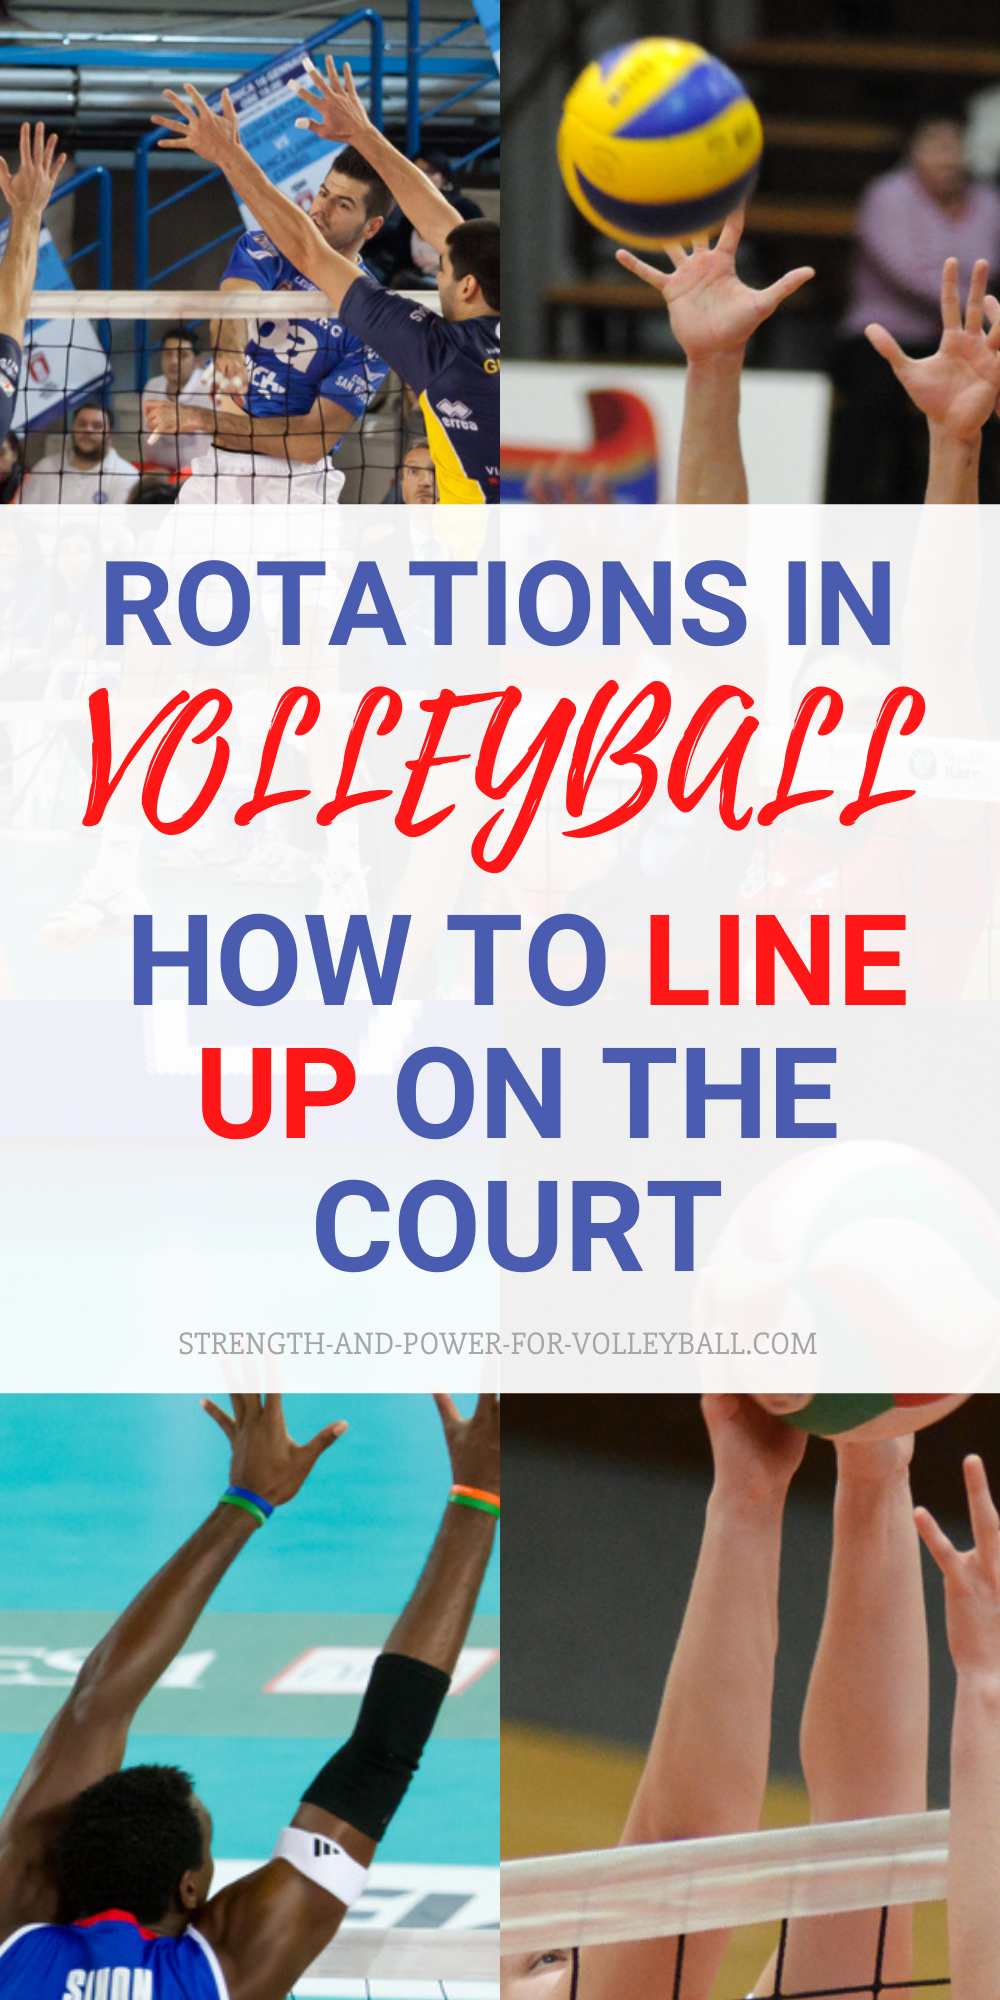 Rotations in Volleyball